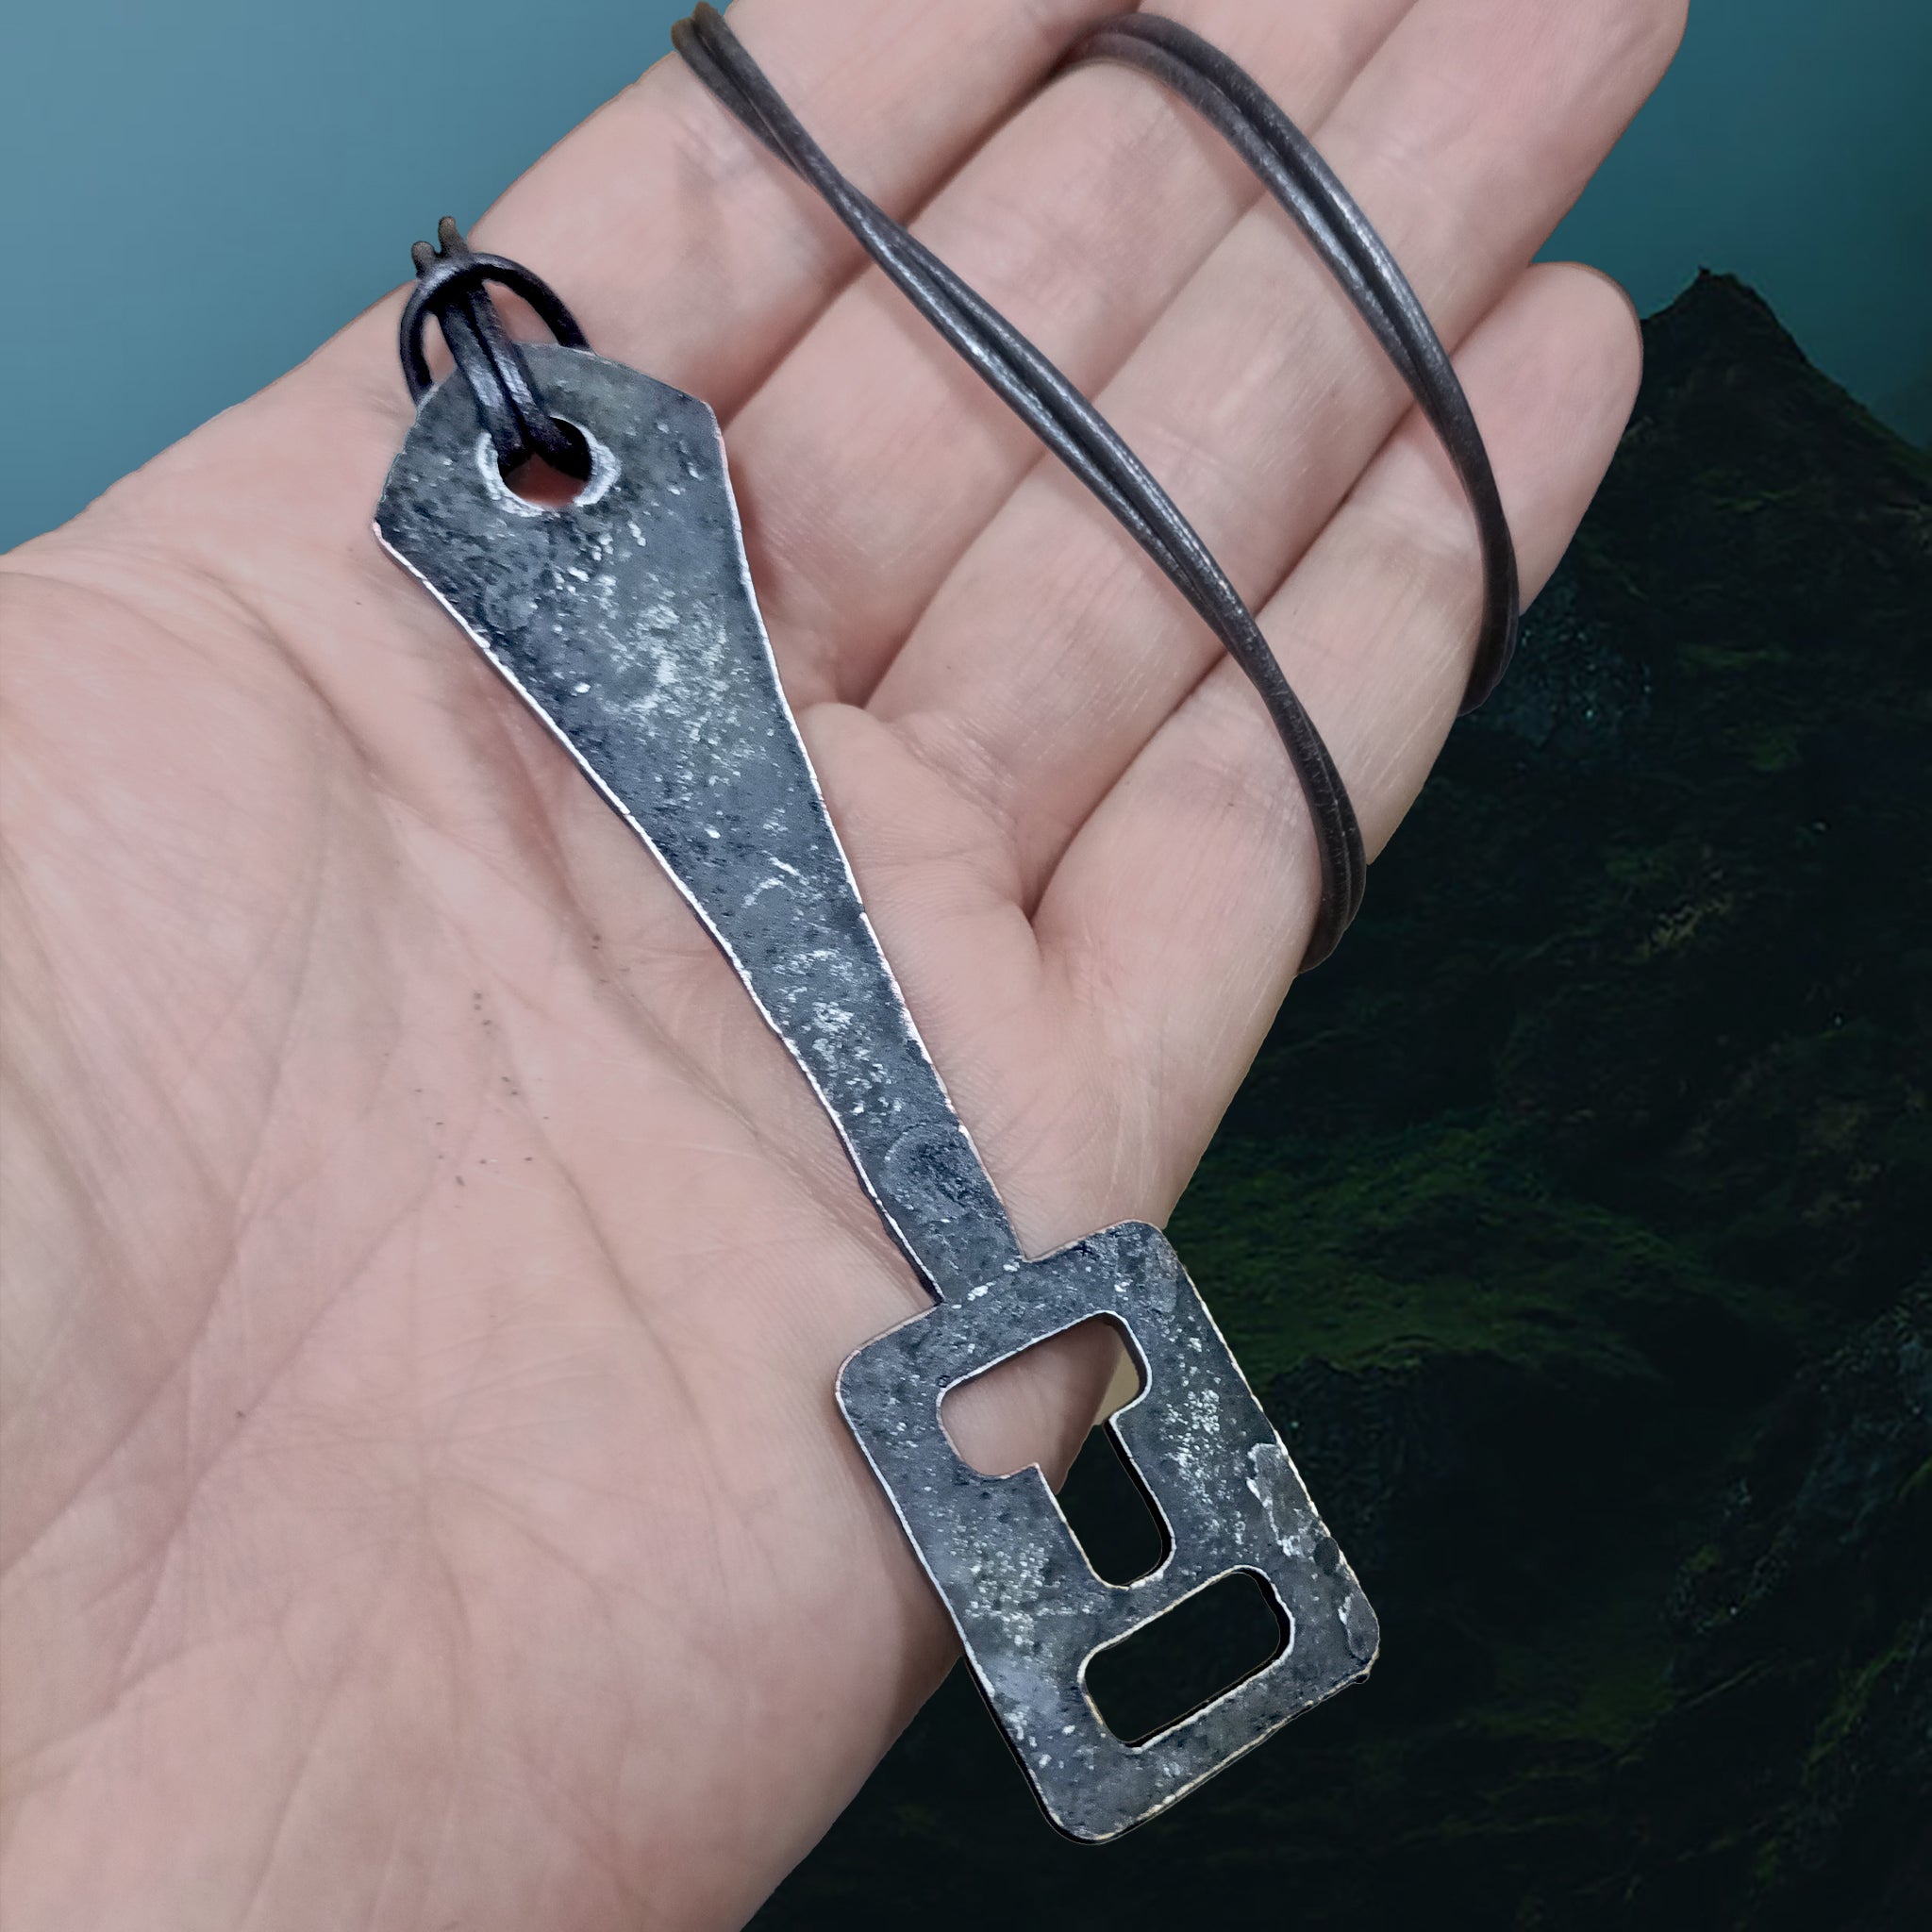 Hand-Forged Replica Viking Steel Padlock Key on Leather Cord - On Hand